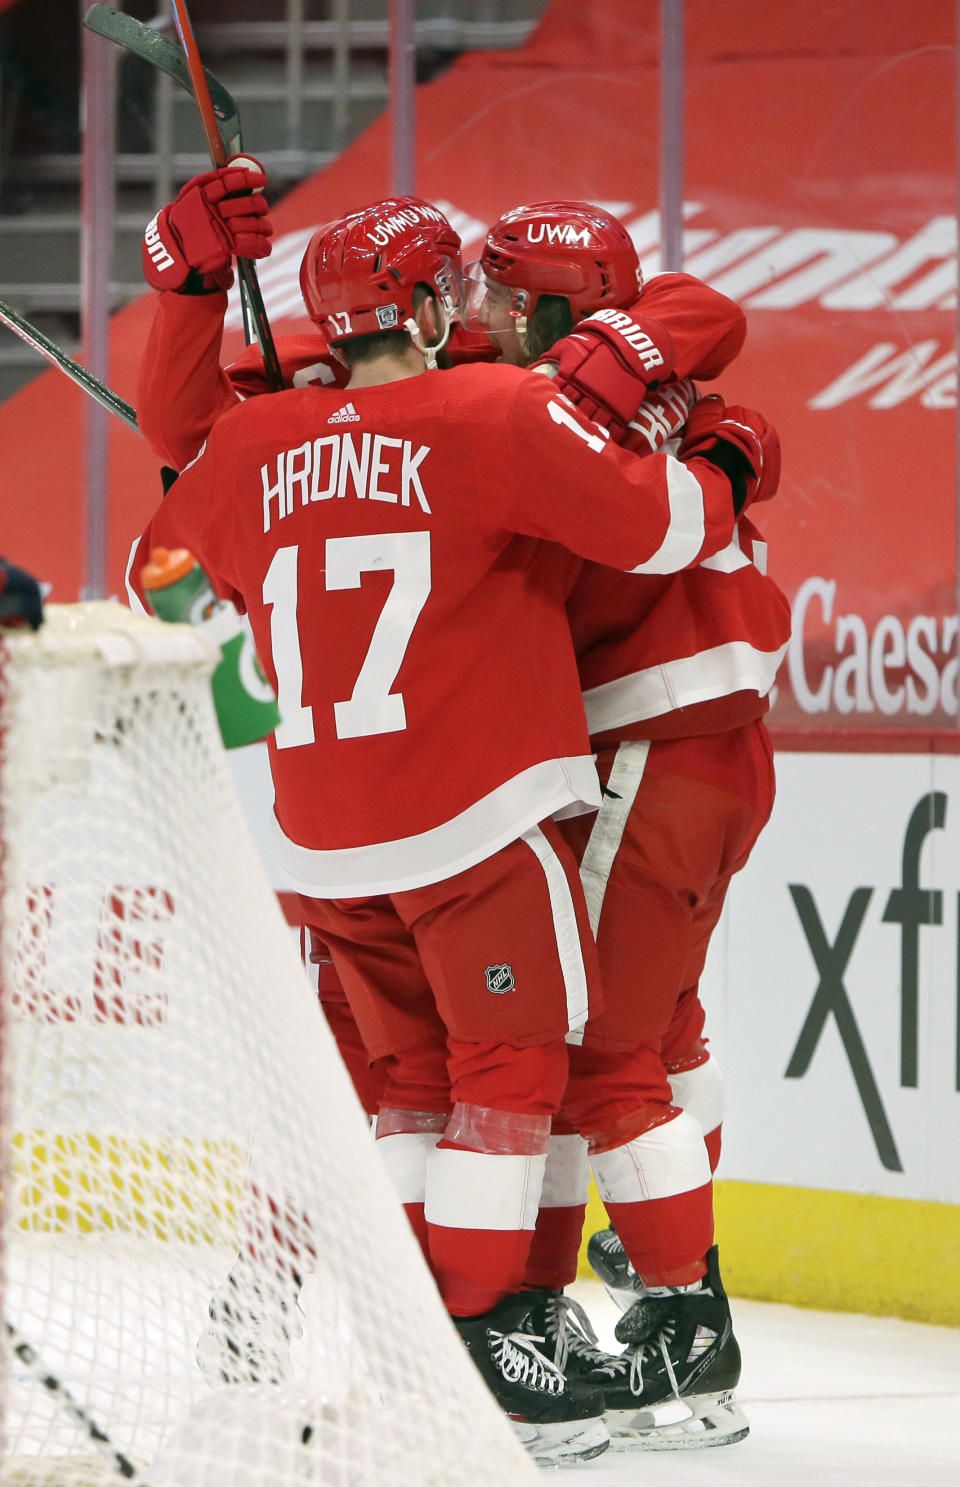 Detroit Red Wings left wing Tyler Bertuzzi, right, celebrates with defenseman Filip Hronek (17) after scoring 15 seconds into overtime to defeat the Columbus Blue Jackets in an NHL hockey game Tuesday, Jan. 19, 2021, in Detroit. (AP Photo/Duane Burleson)